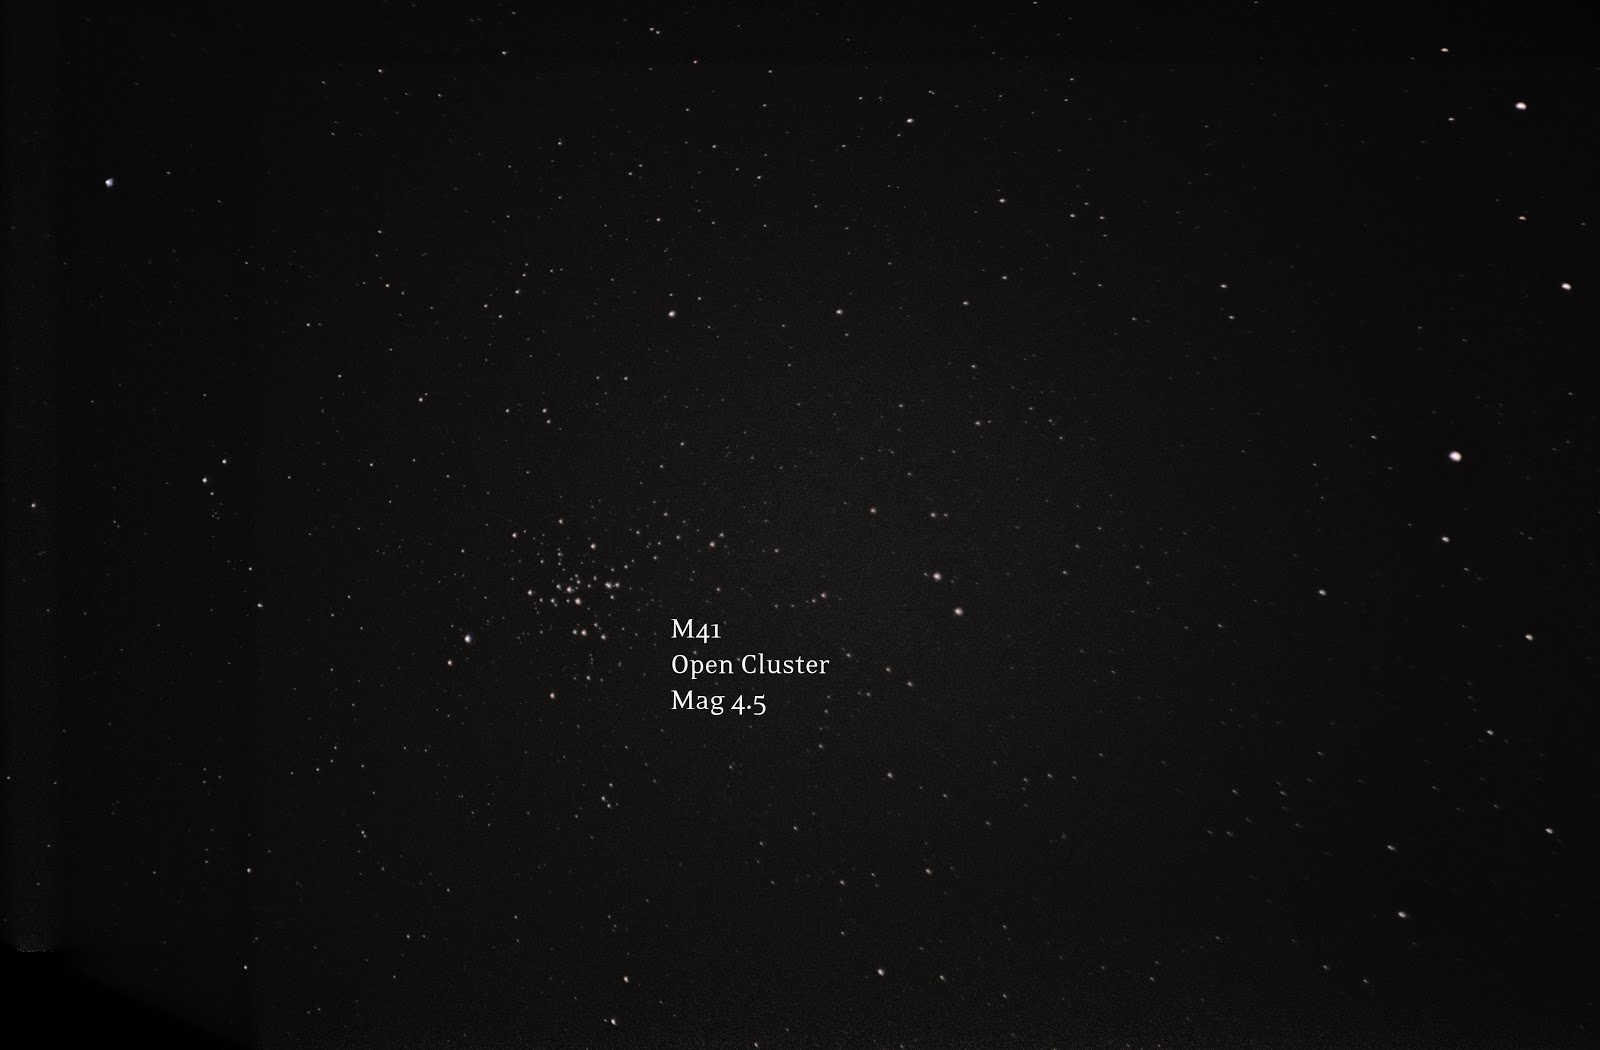 open cluster M41 with T5i